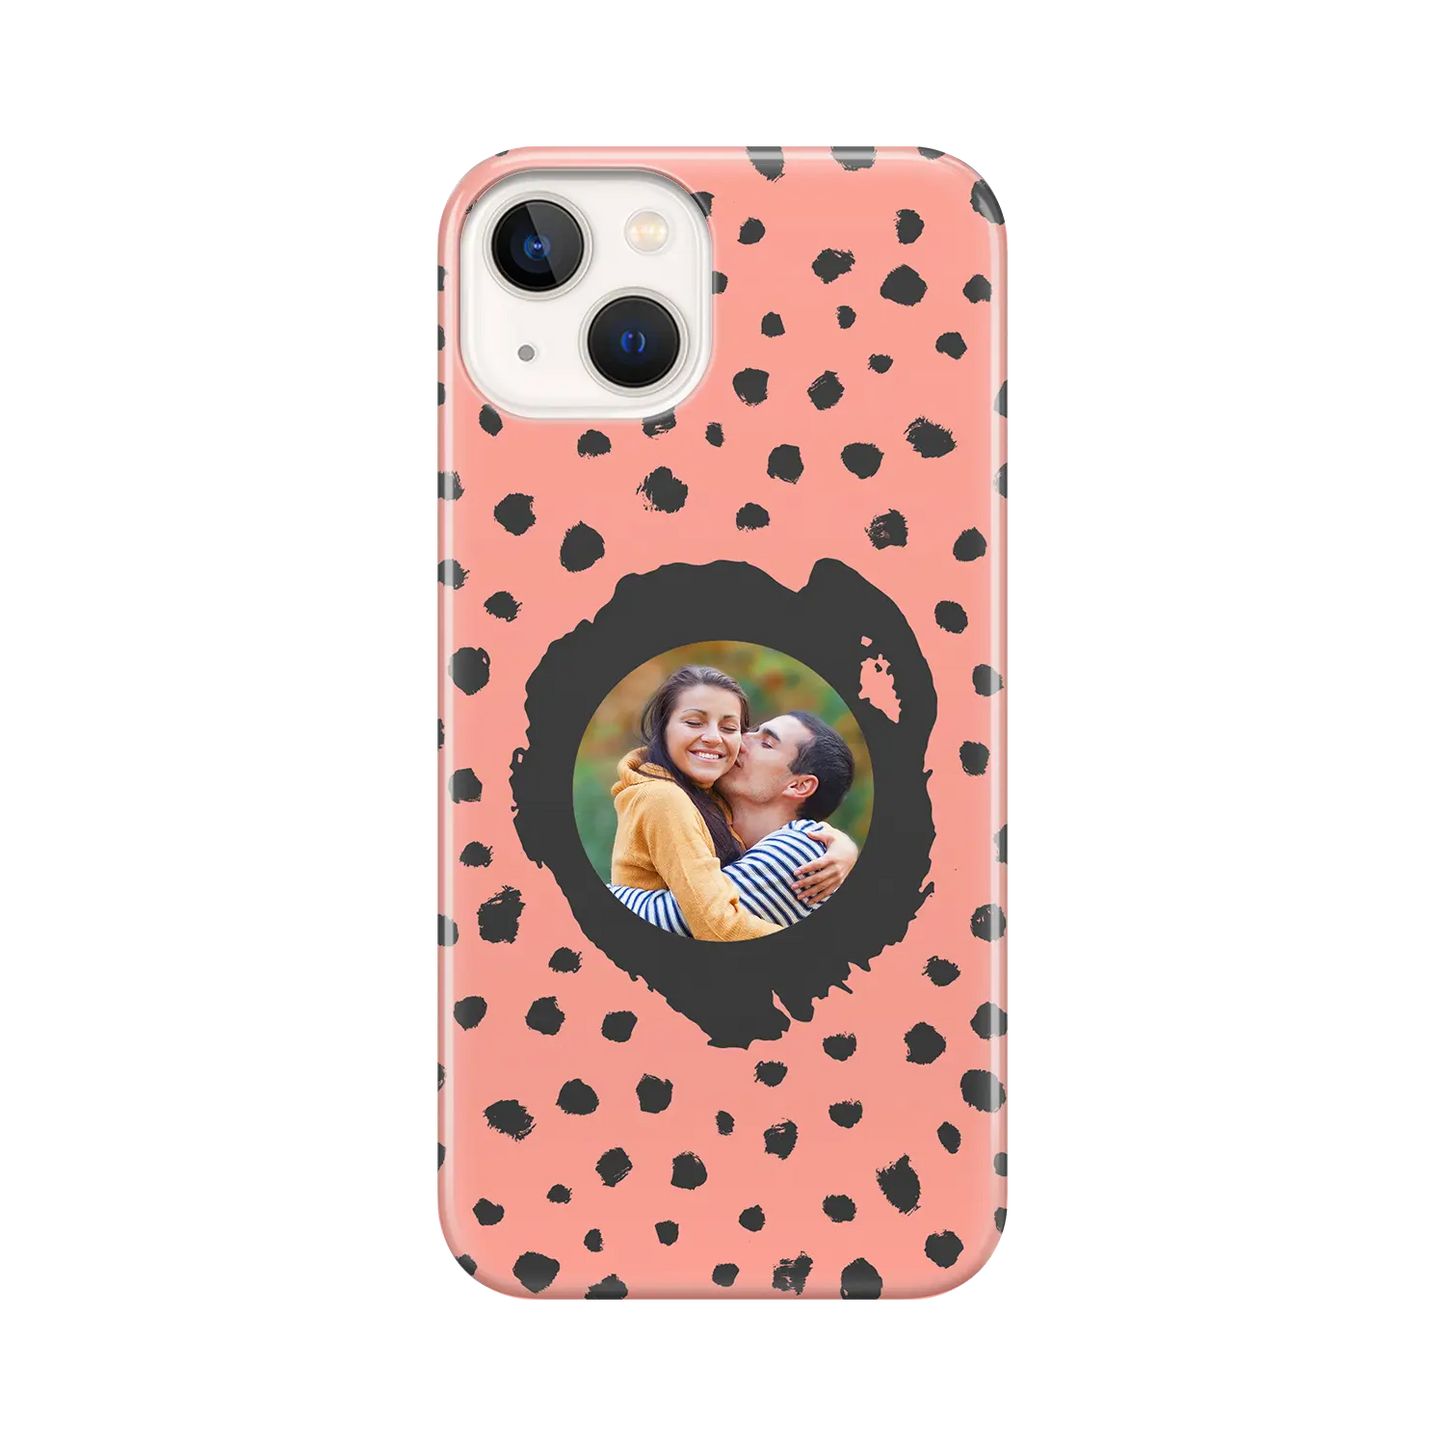 Grunge Dots Picture Style - Custom iPhone Case